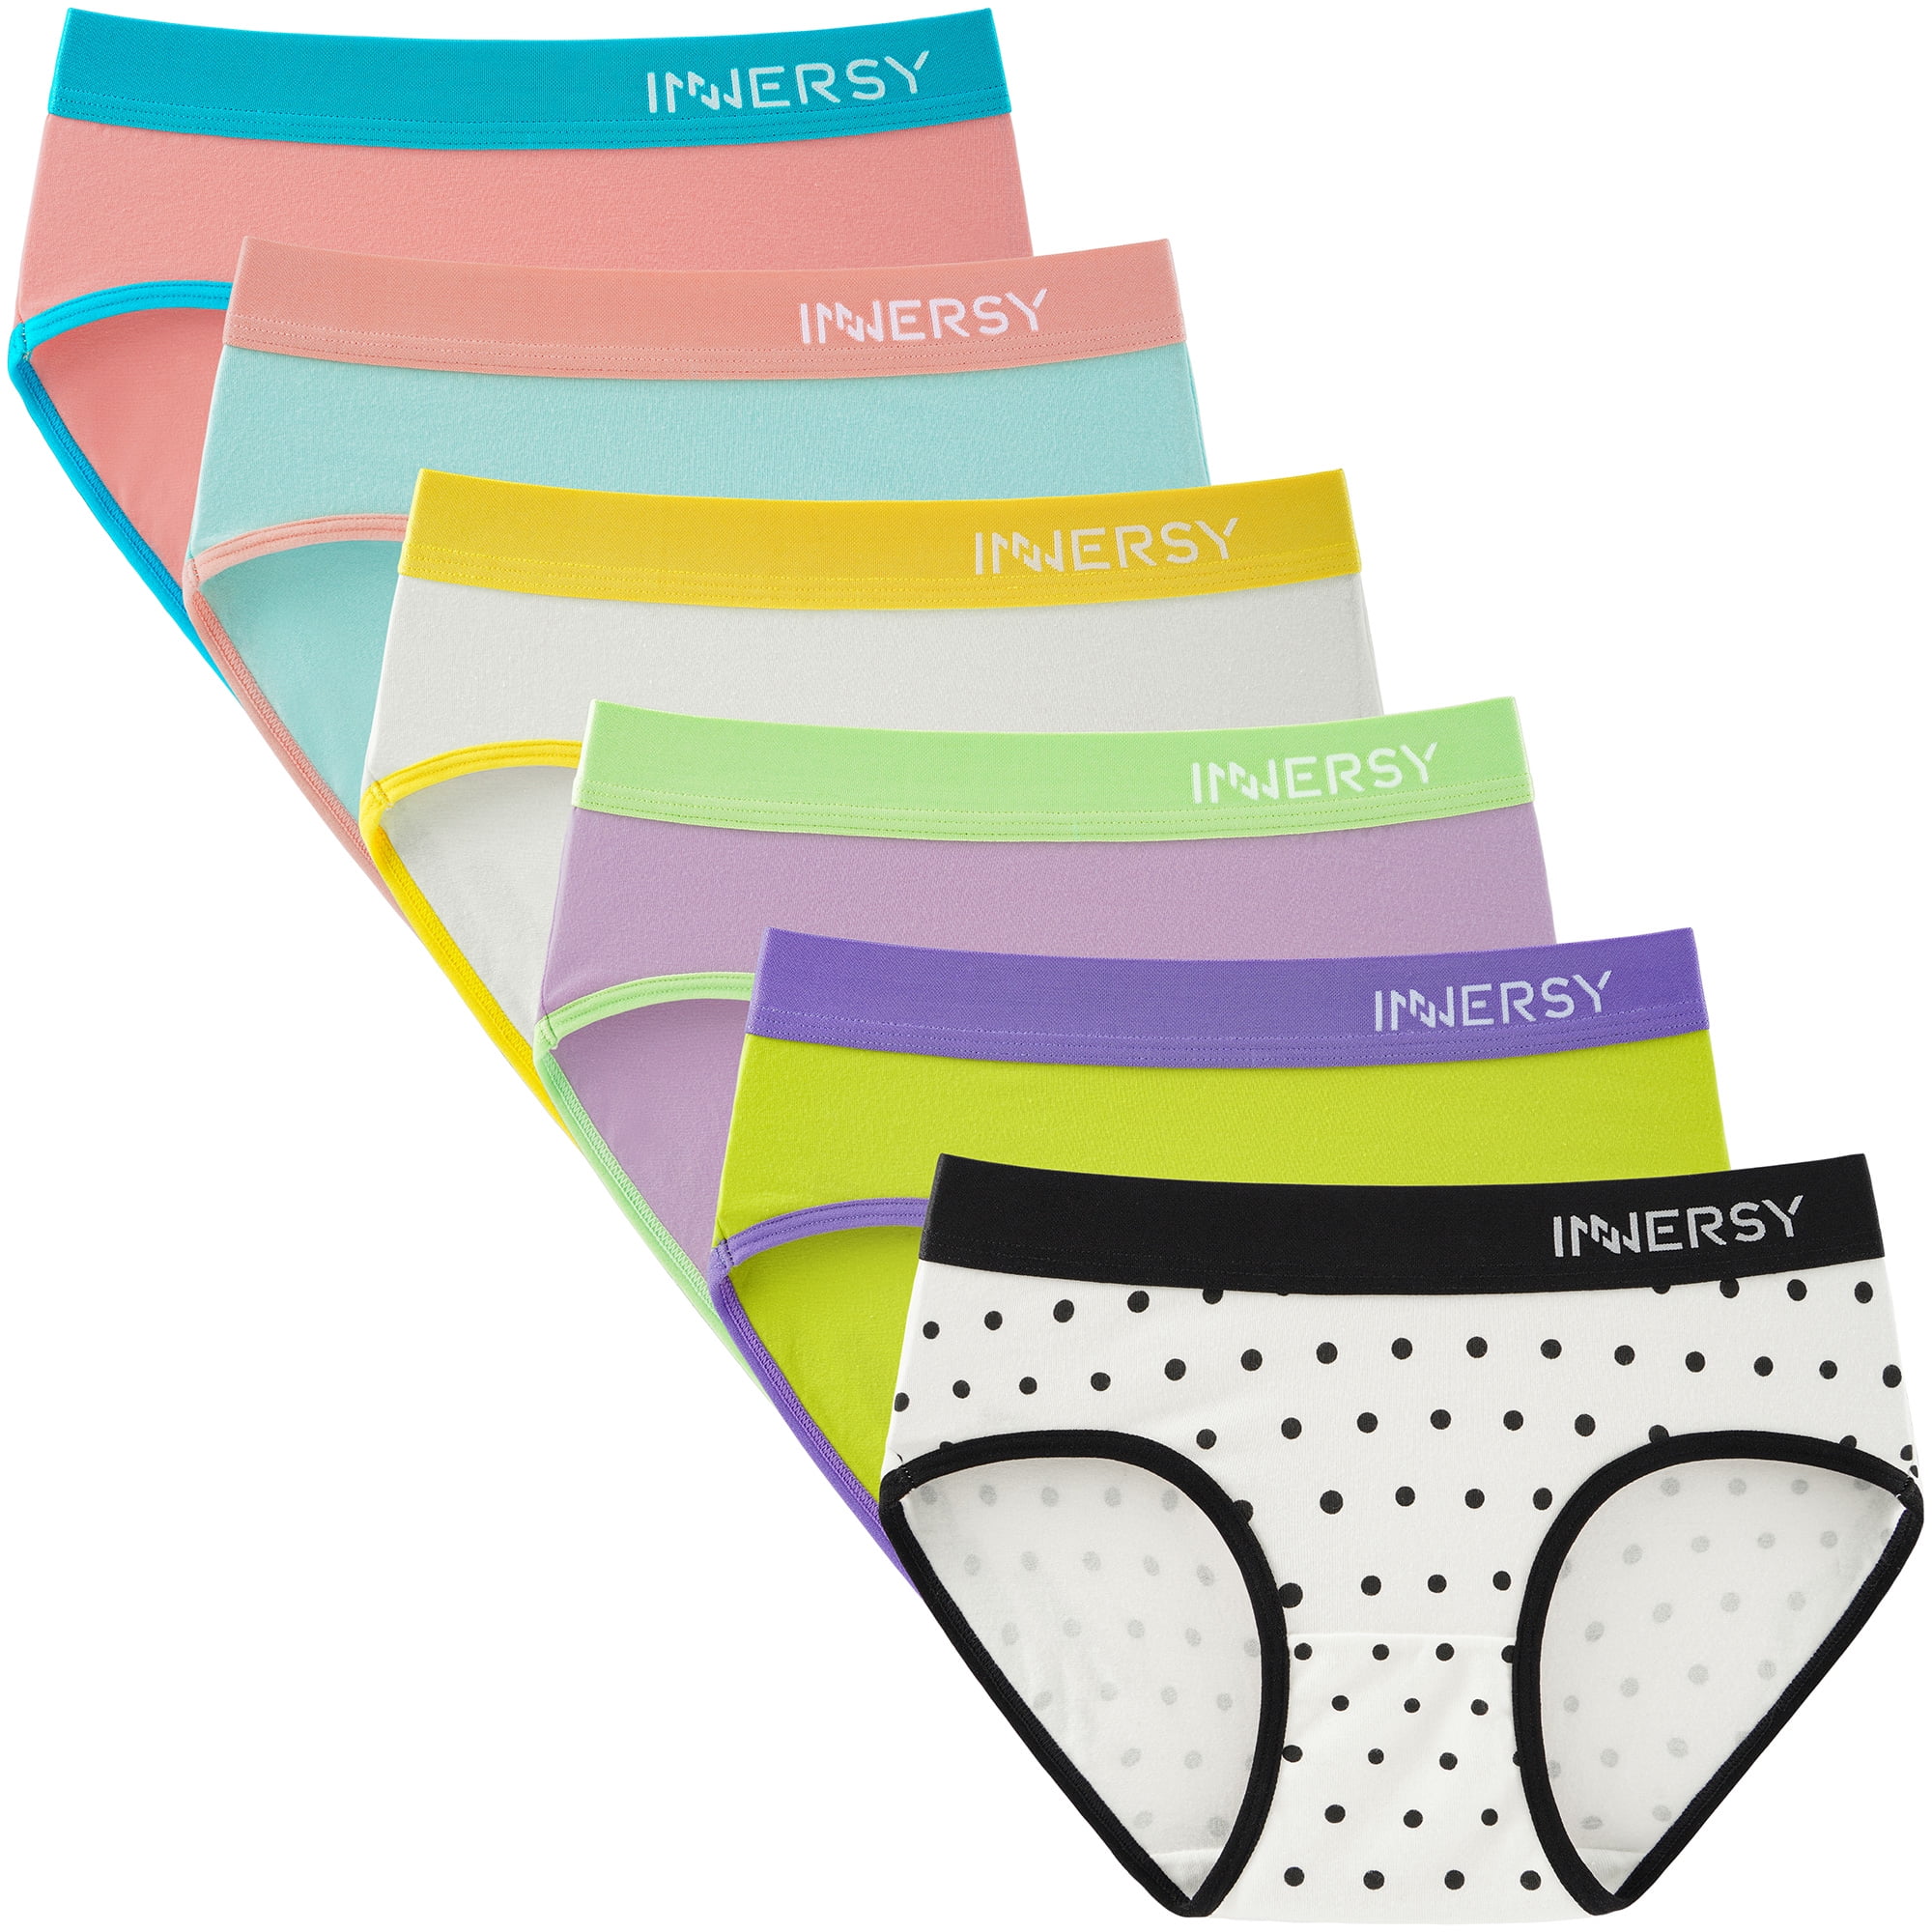 INNERSY Period Underwear for Teen Girls Cotton Leakproof Menstrual Panties  3 Pack (L(12-14 yrs), Black with White Piping) 